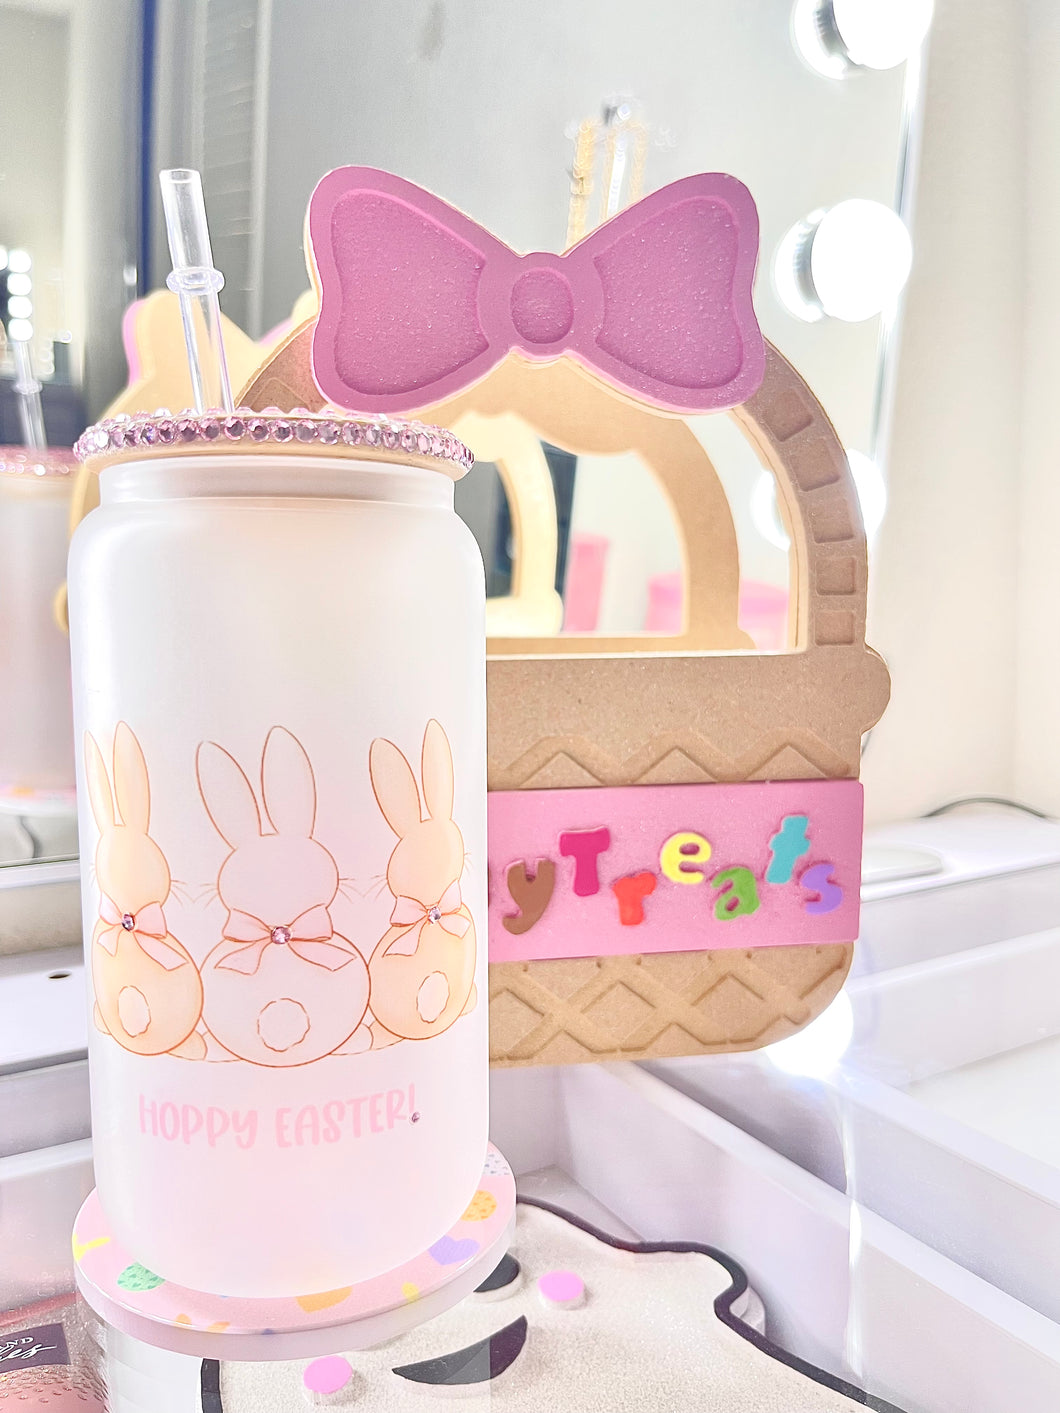 Hoppy Easter frosted glass can